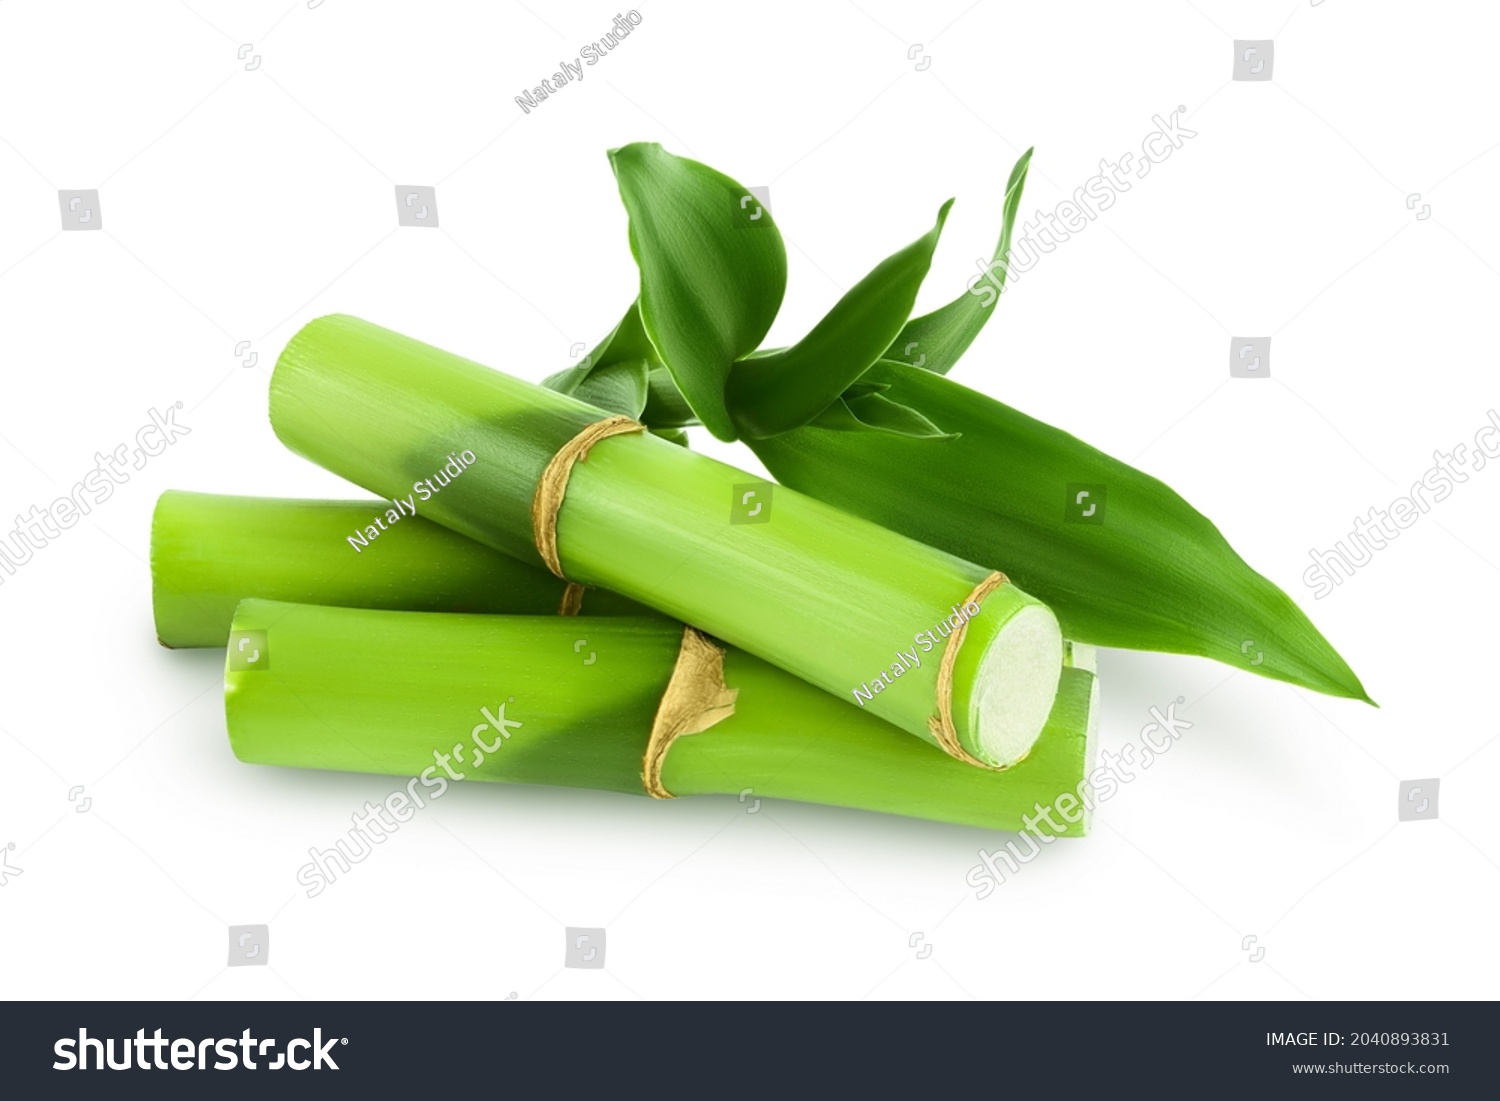 Green bamboo with leaves isolated on white background with clipping path and full depth of field #2040893831